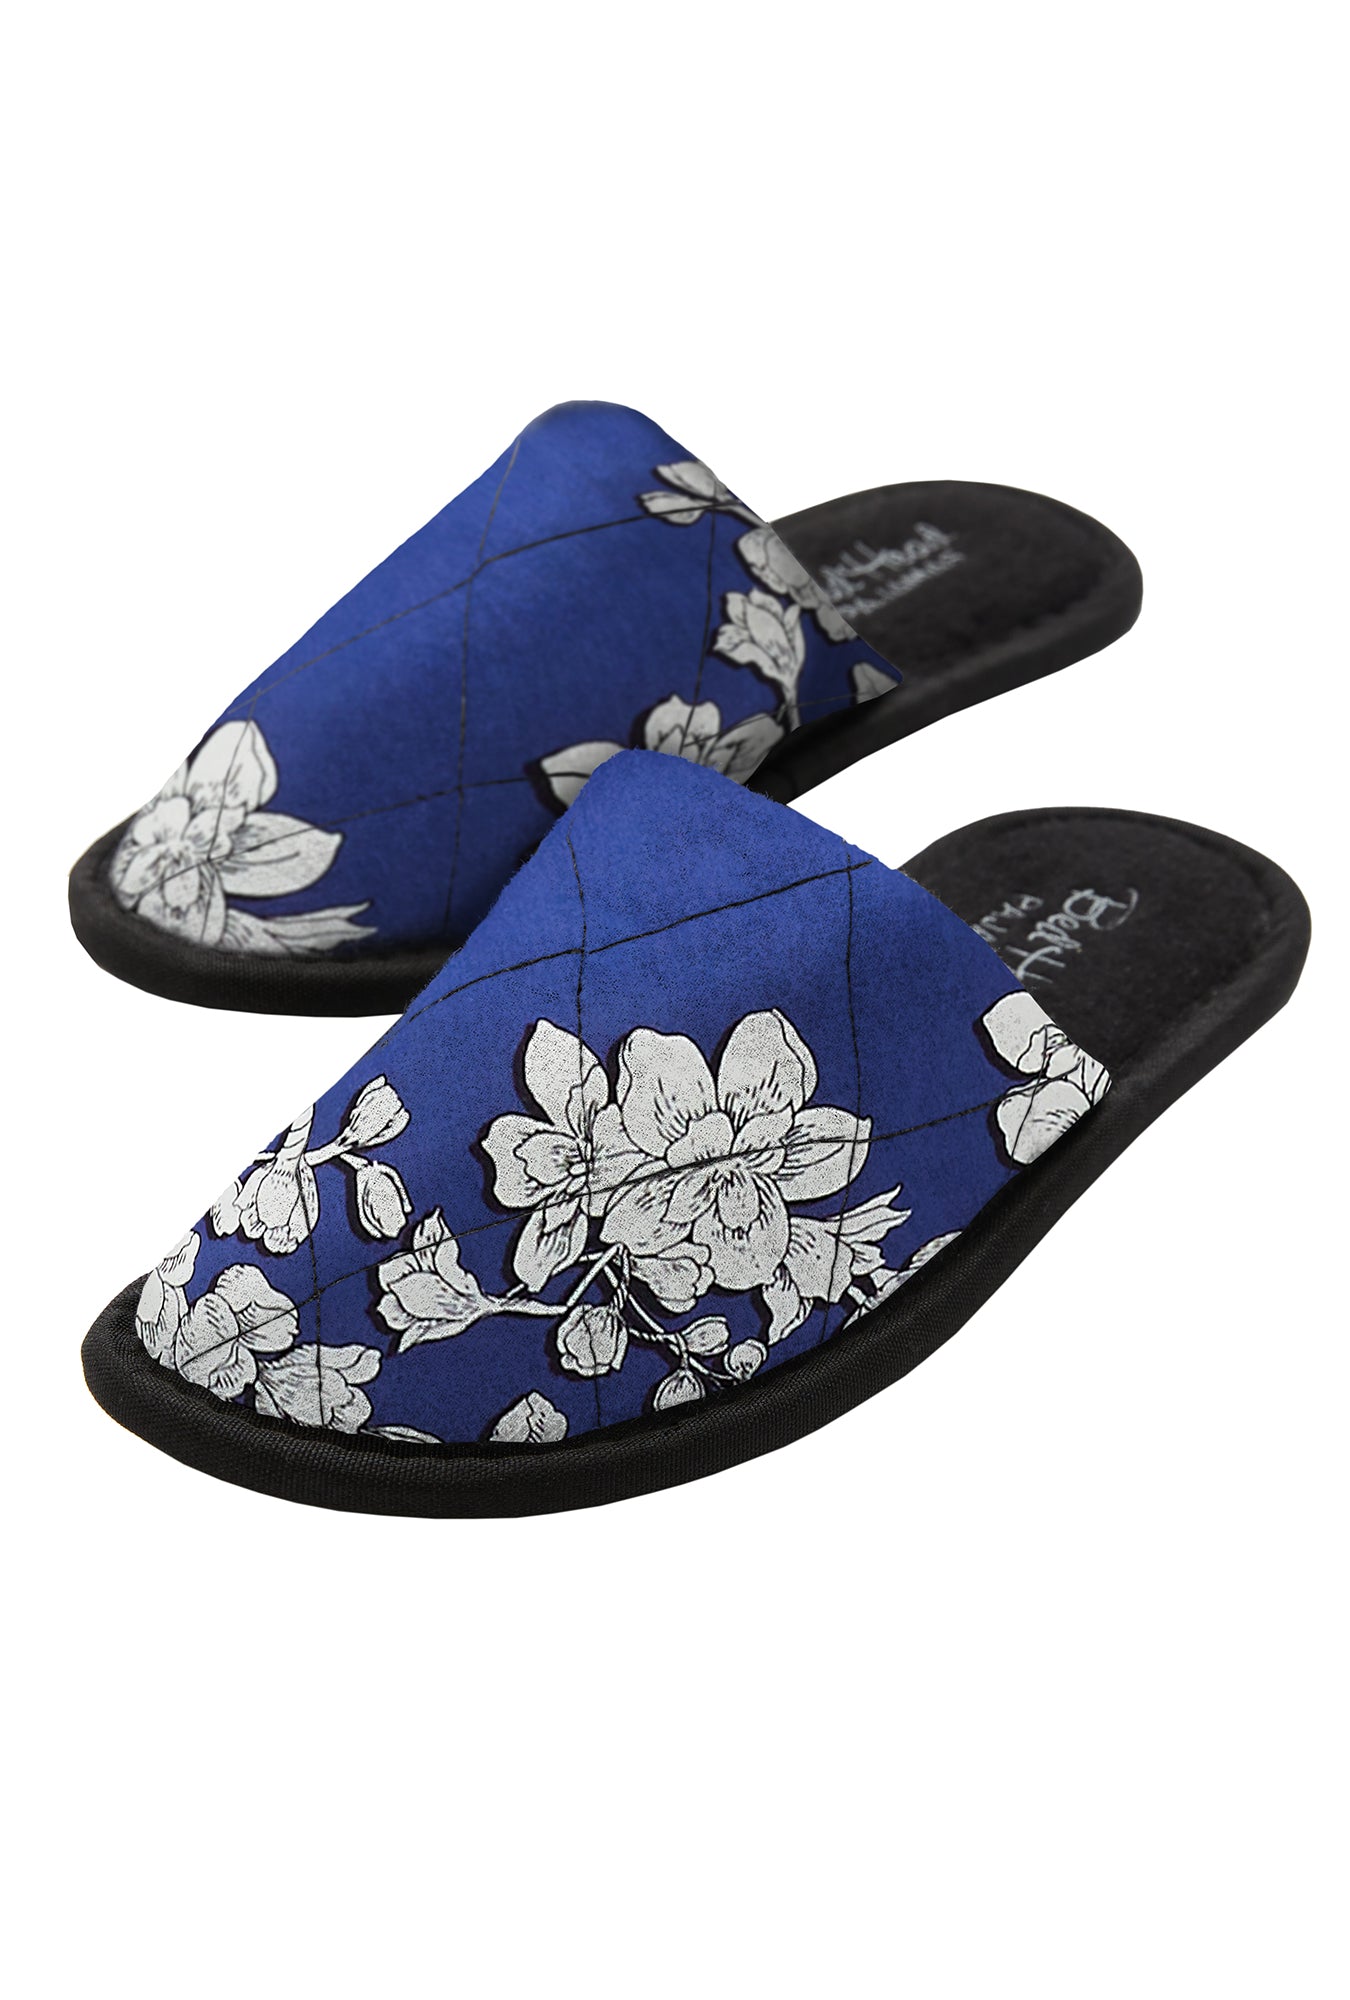 BEDHEAD NAVY SHADOW BLOSSOM FRENCH TERRY LINED SLIPPER